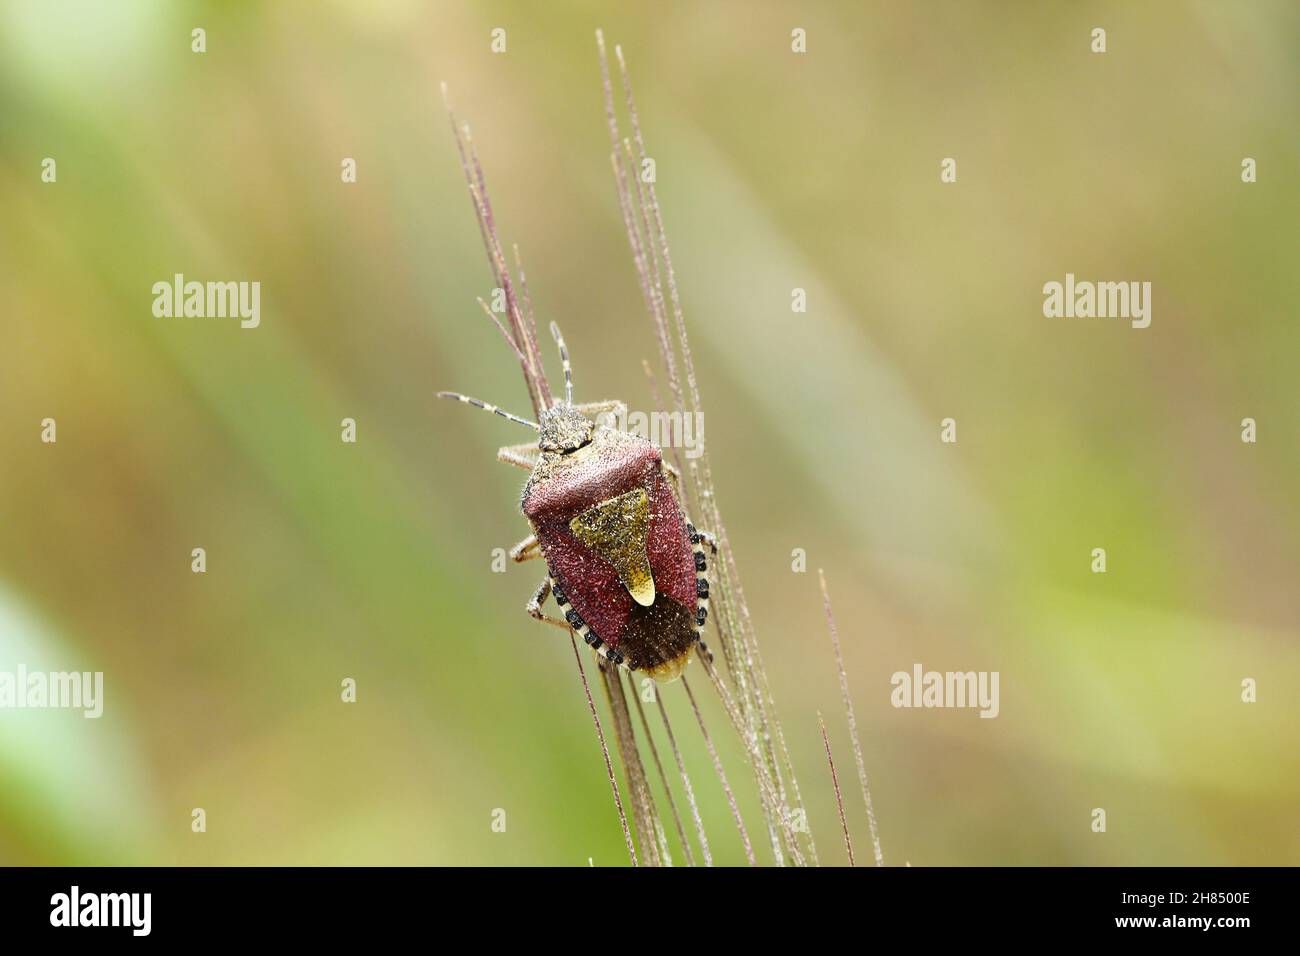 Dolycoris baccarum, the sloe bug, is a species of shield bug in the family Pentatomidae on barley Stock Photo